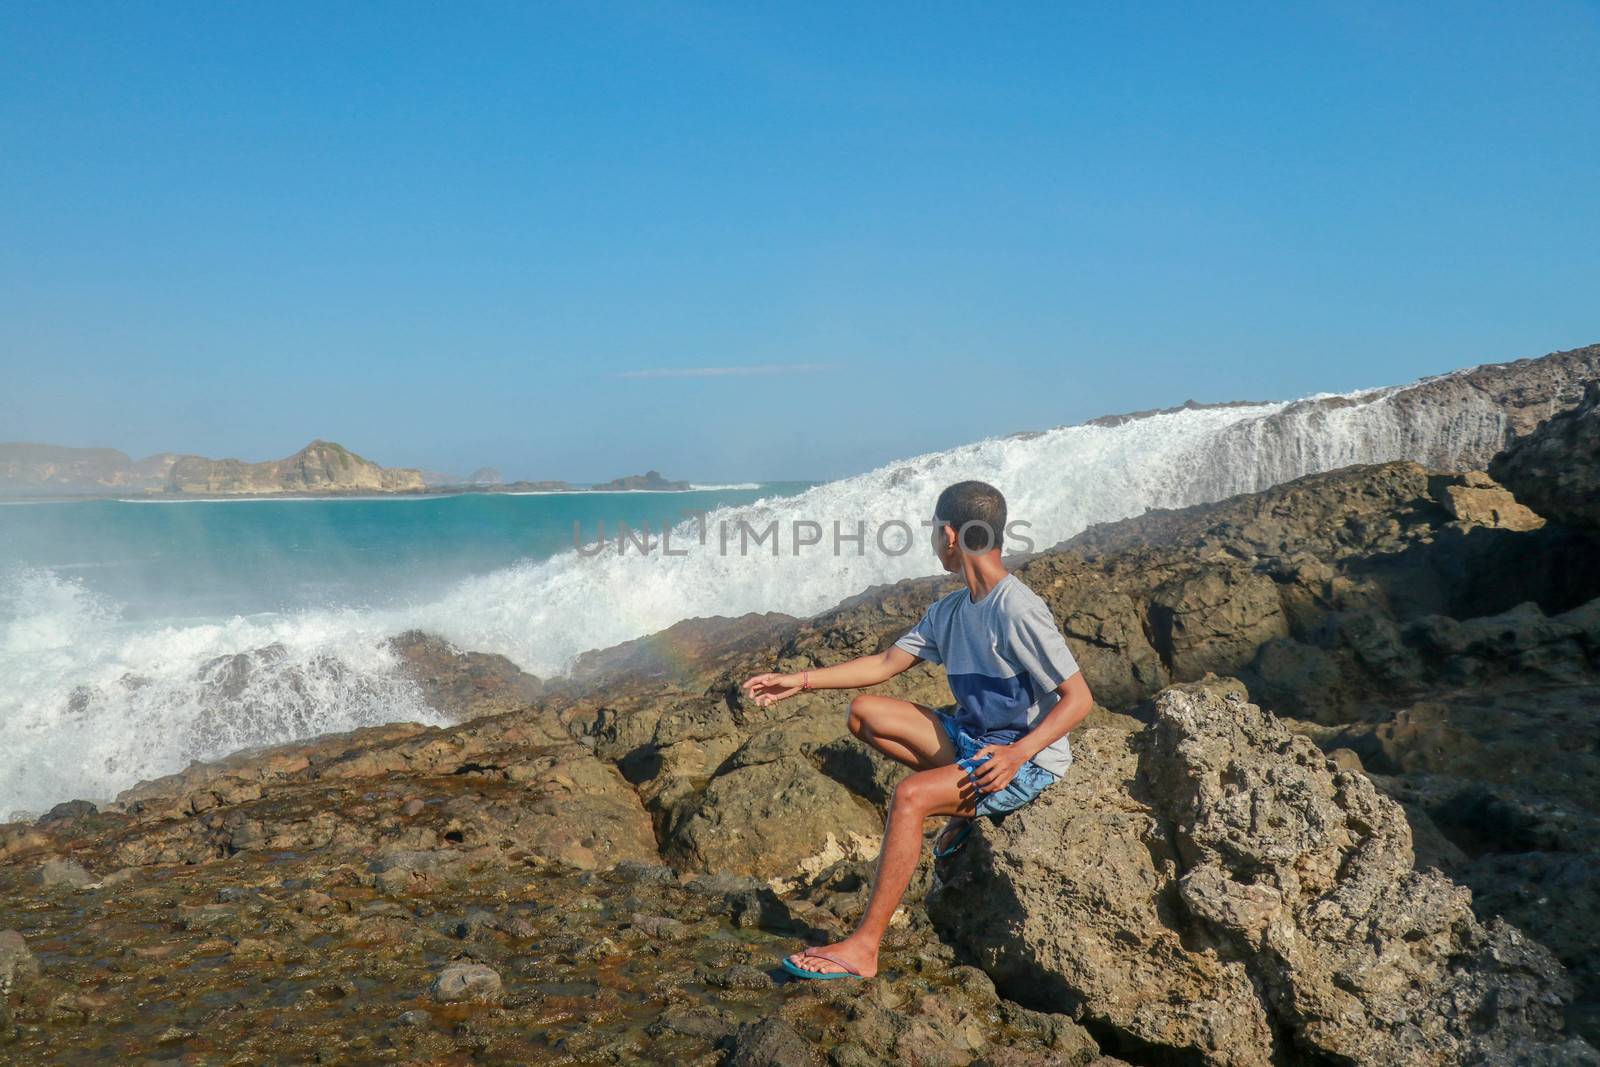 young man in a T-shirt and blue shorts sitting on a rocky shore. This is a view of man sitting on the rock by the sea.